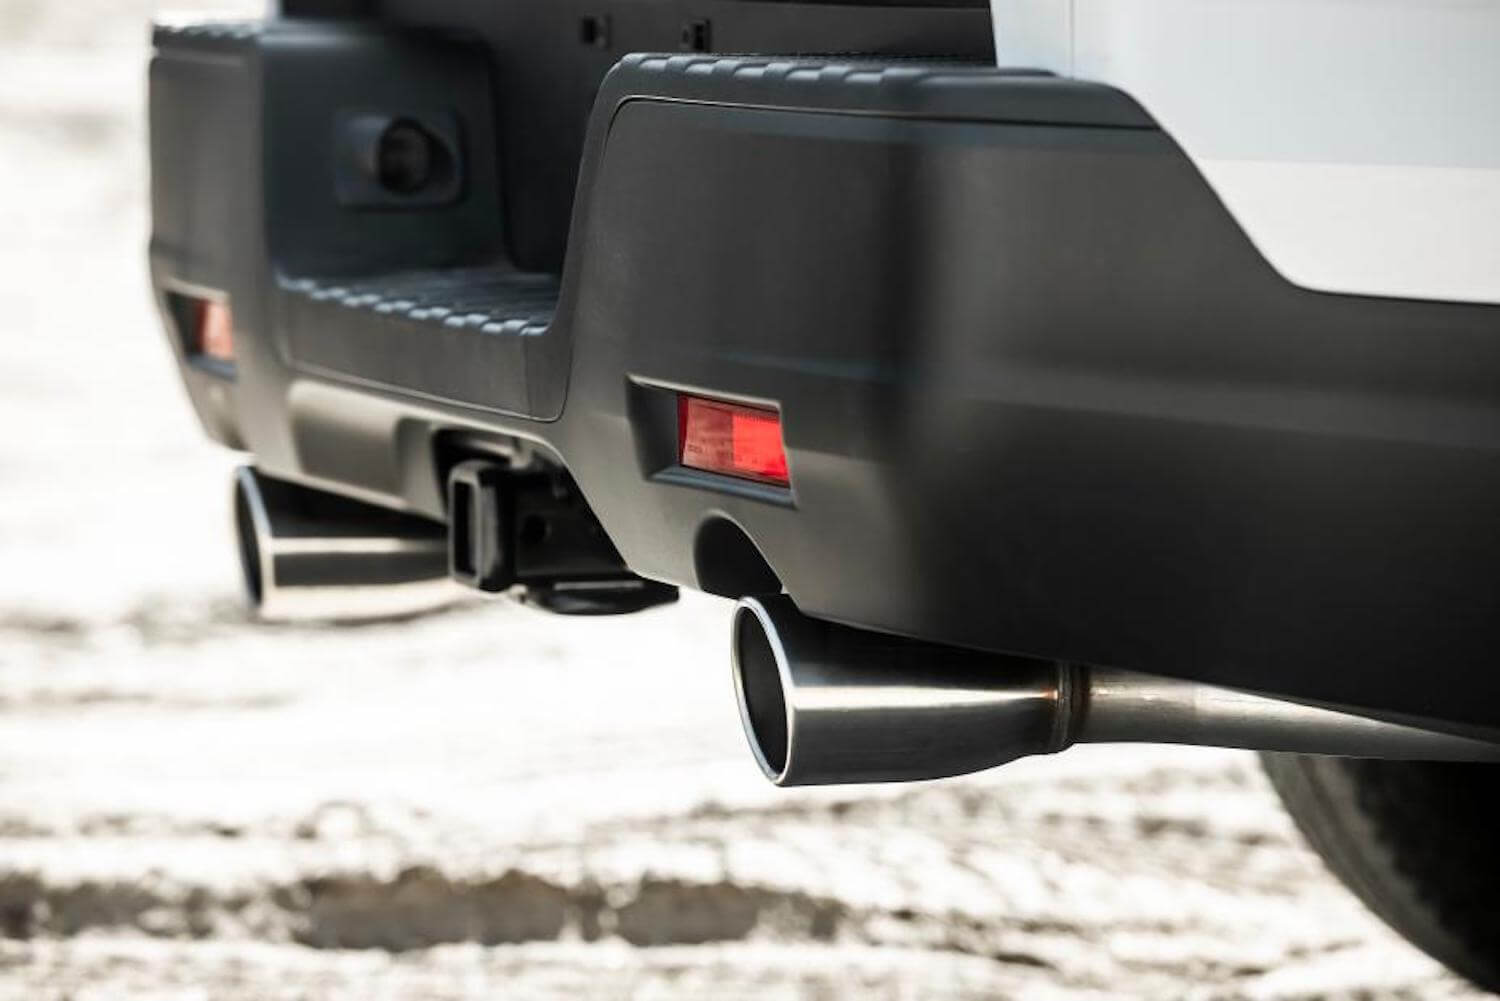 The exhaust pipes of the 2023 Honda Ridgeline HPD tuned pickup truck.